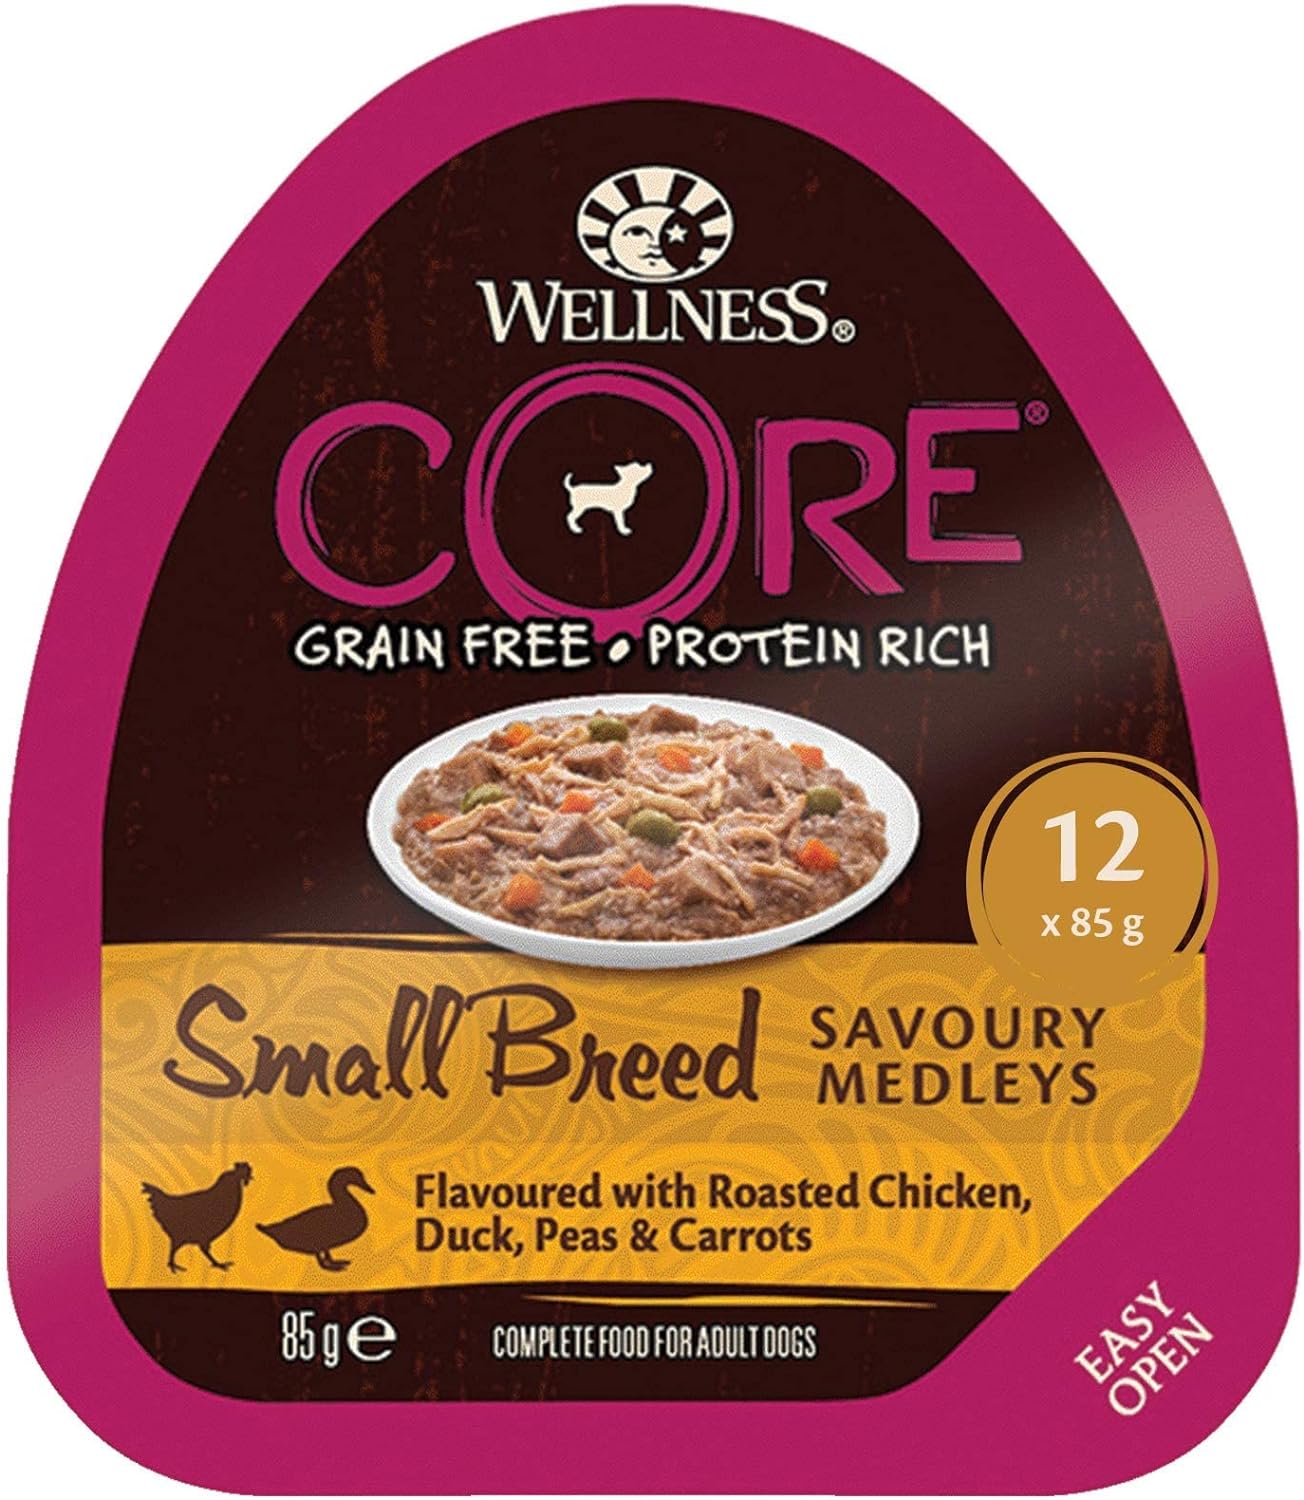 Wellness CORE Small Breed Savoury Medleys, Dog Food Wet for Smaller Breed, Grain Free, High Meat Content, Chicken and Duck, 85 g (Pack of 12)?10453